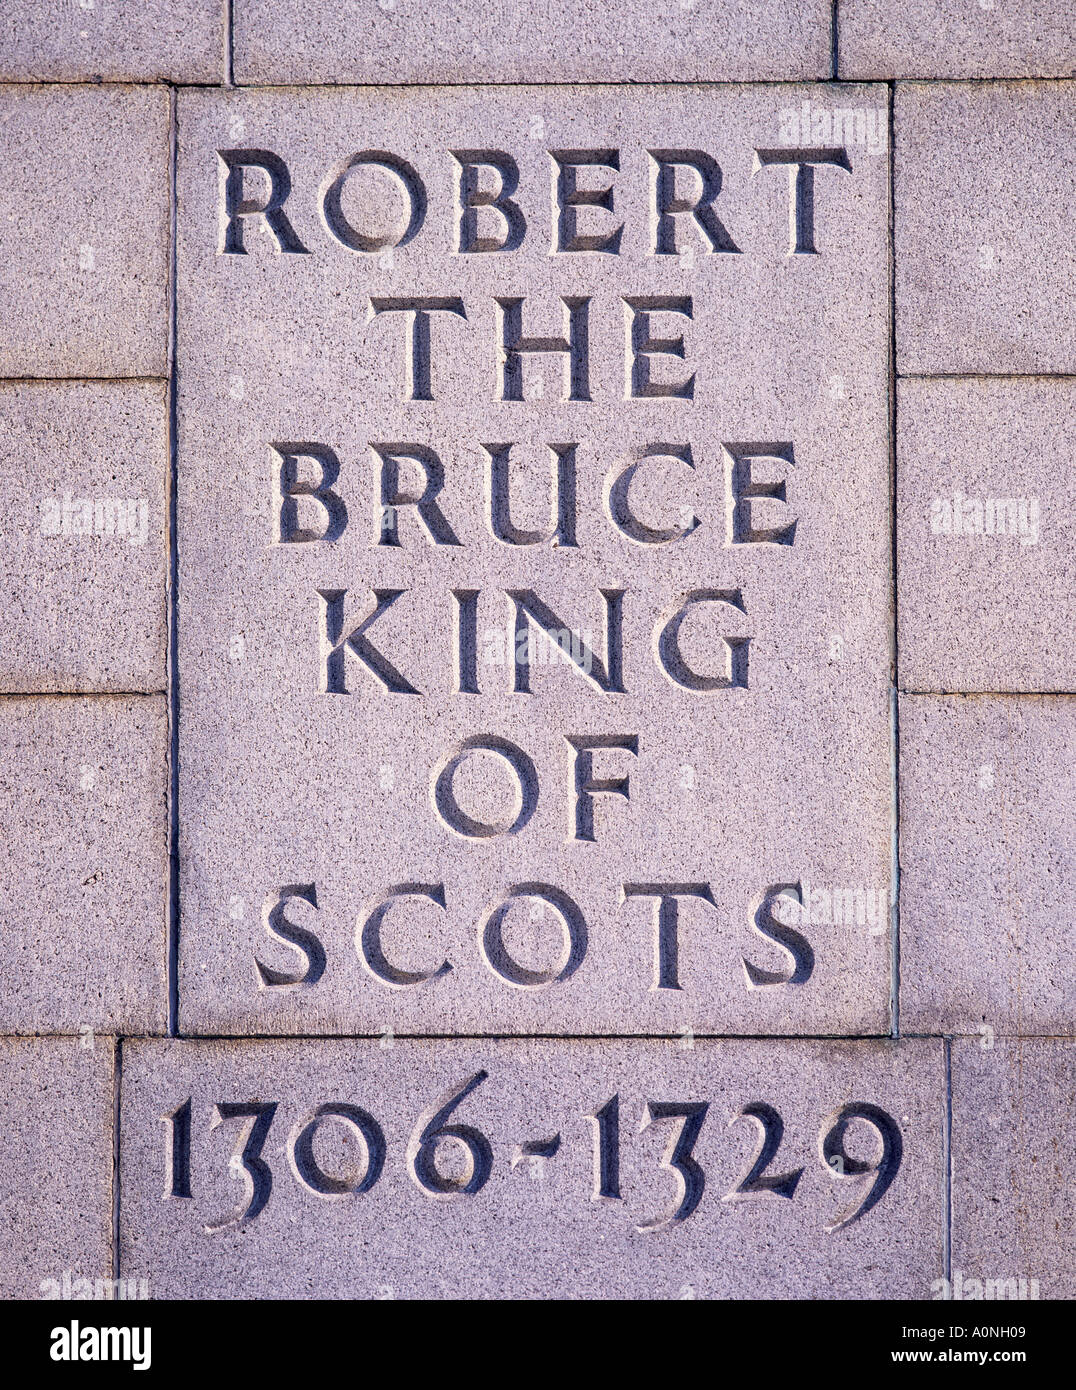 Inscription on the plinth of the statue of Robert the Bruce King of Scots, Bannockburn, Stirling, Scotland, UK Stock Photo